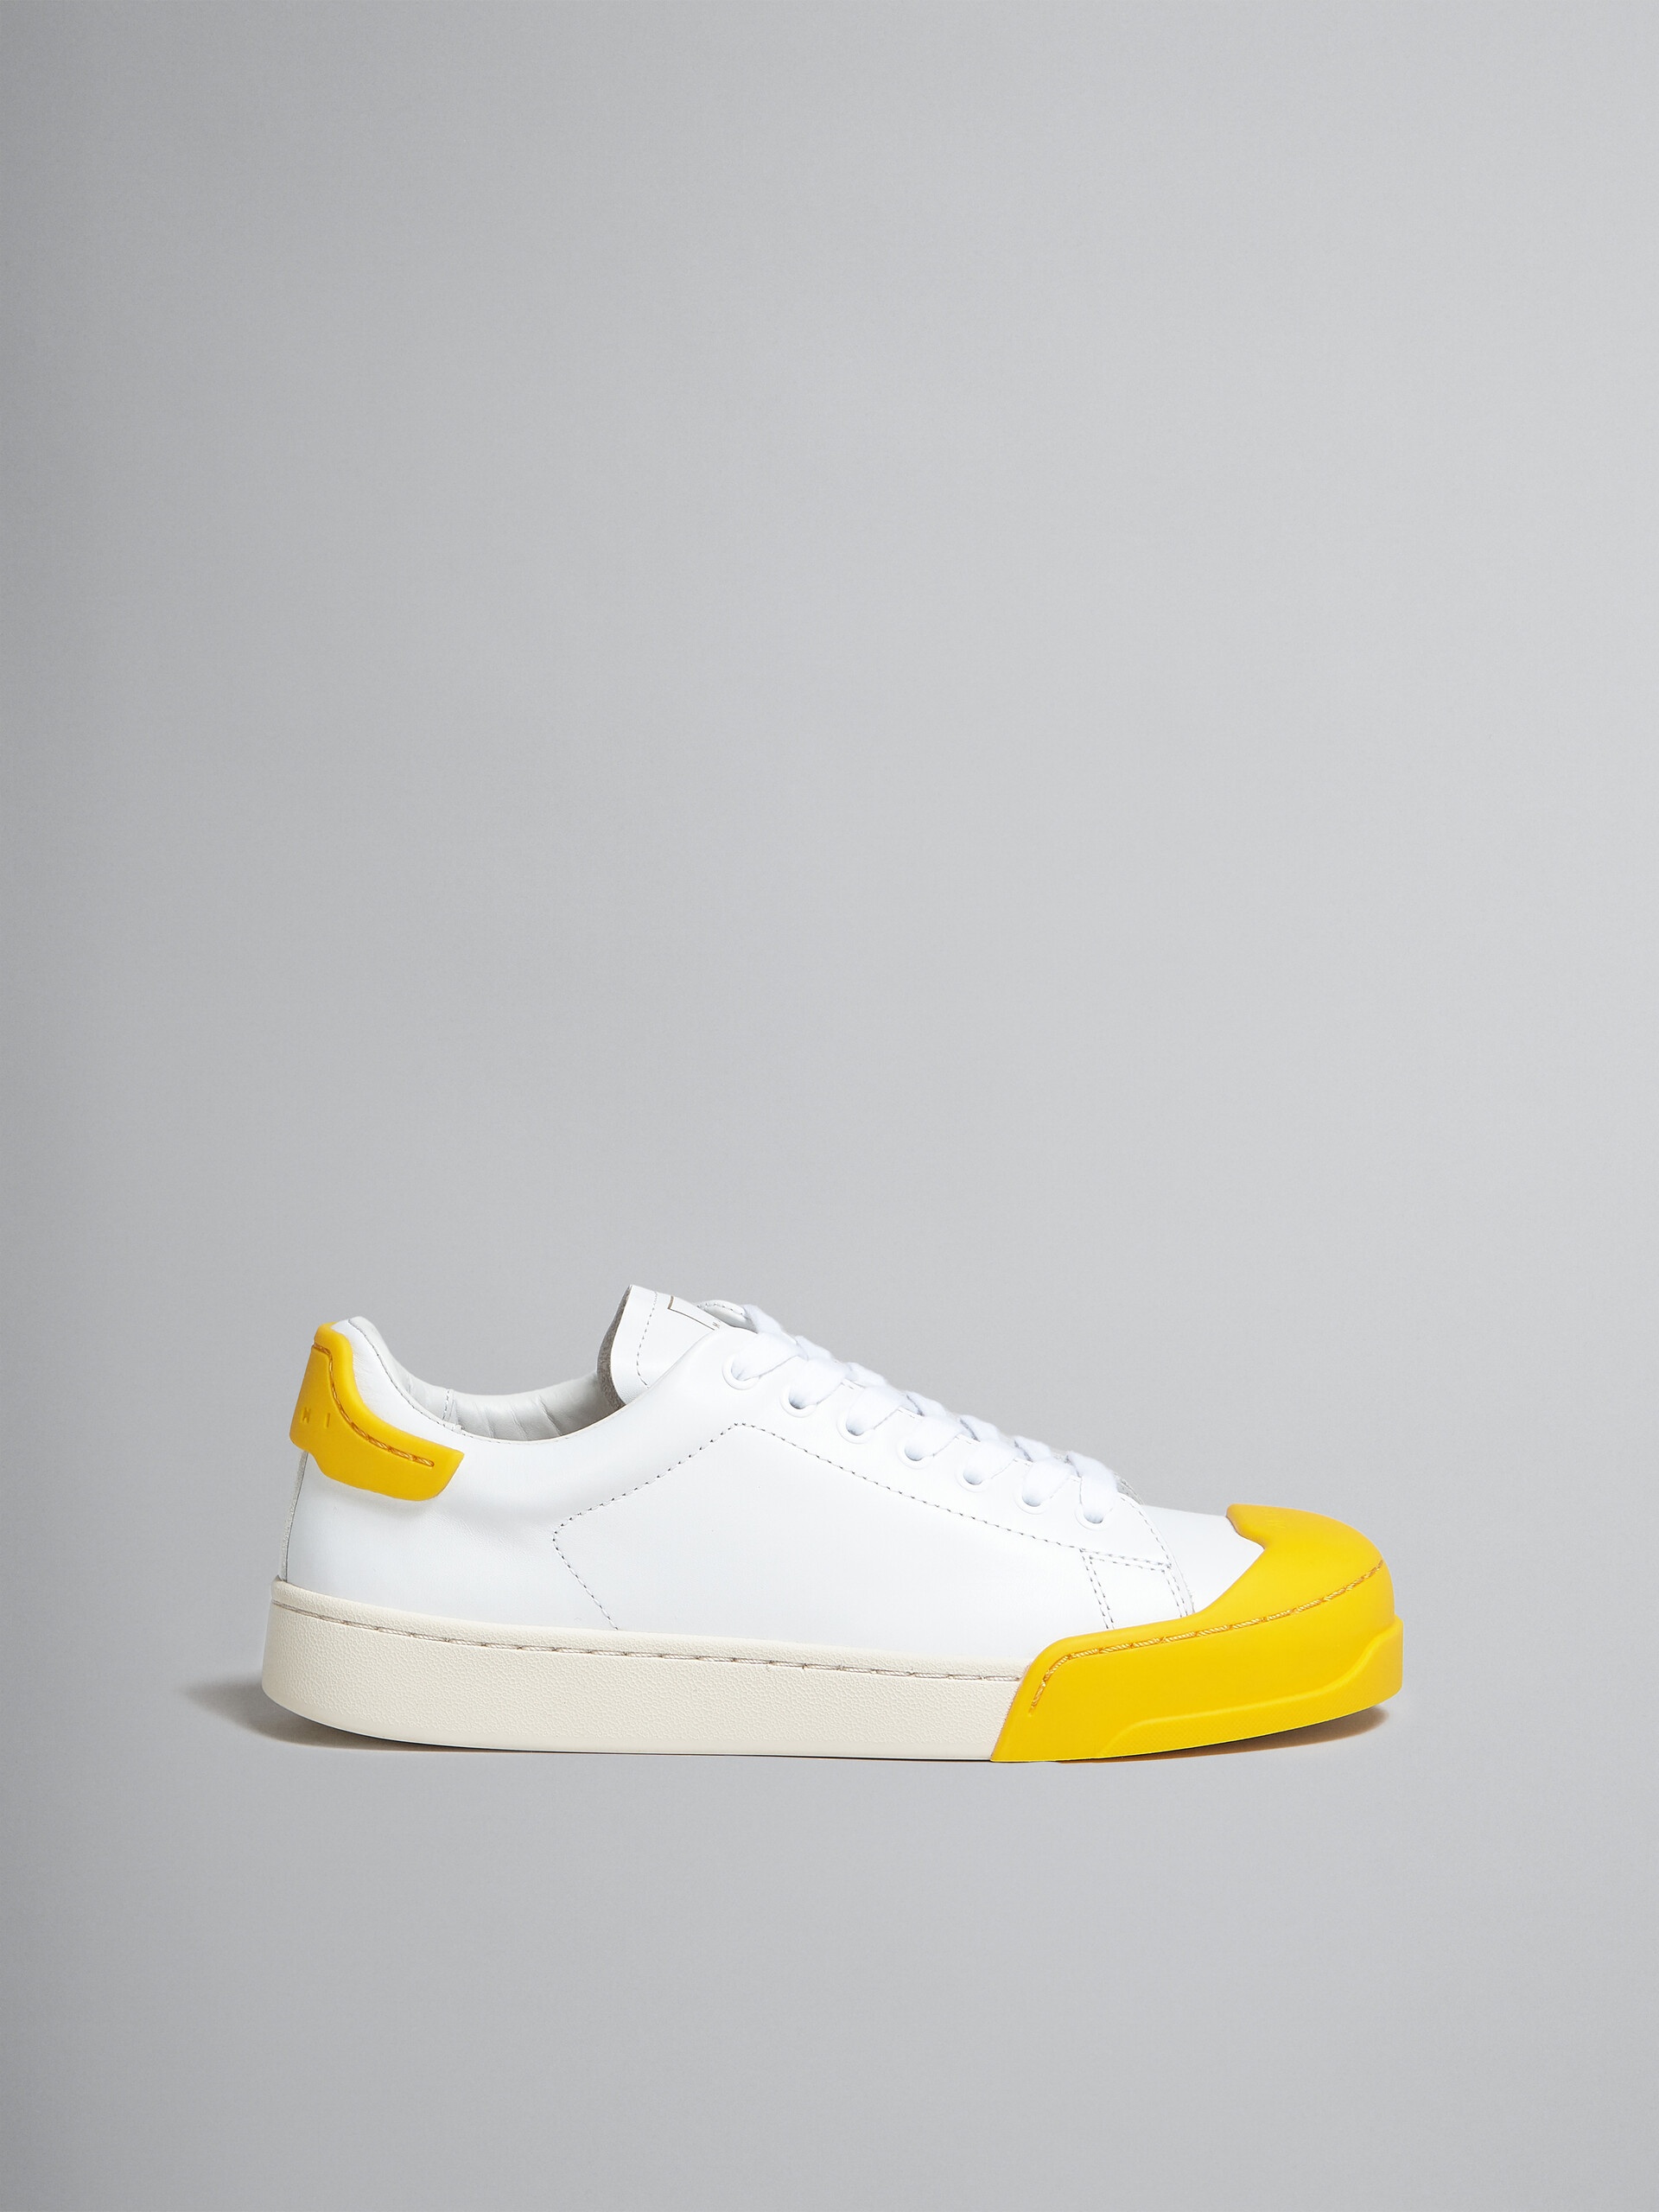 DADA BUMPER SNEAKER IN WHITE AND YELLOW LEATHER - 1